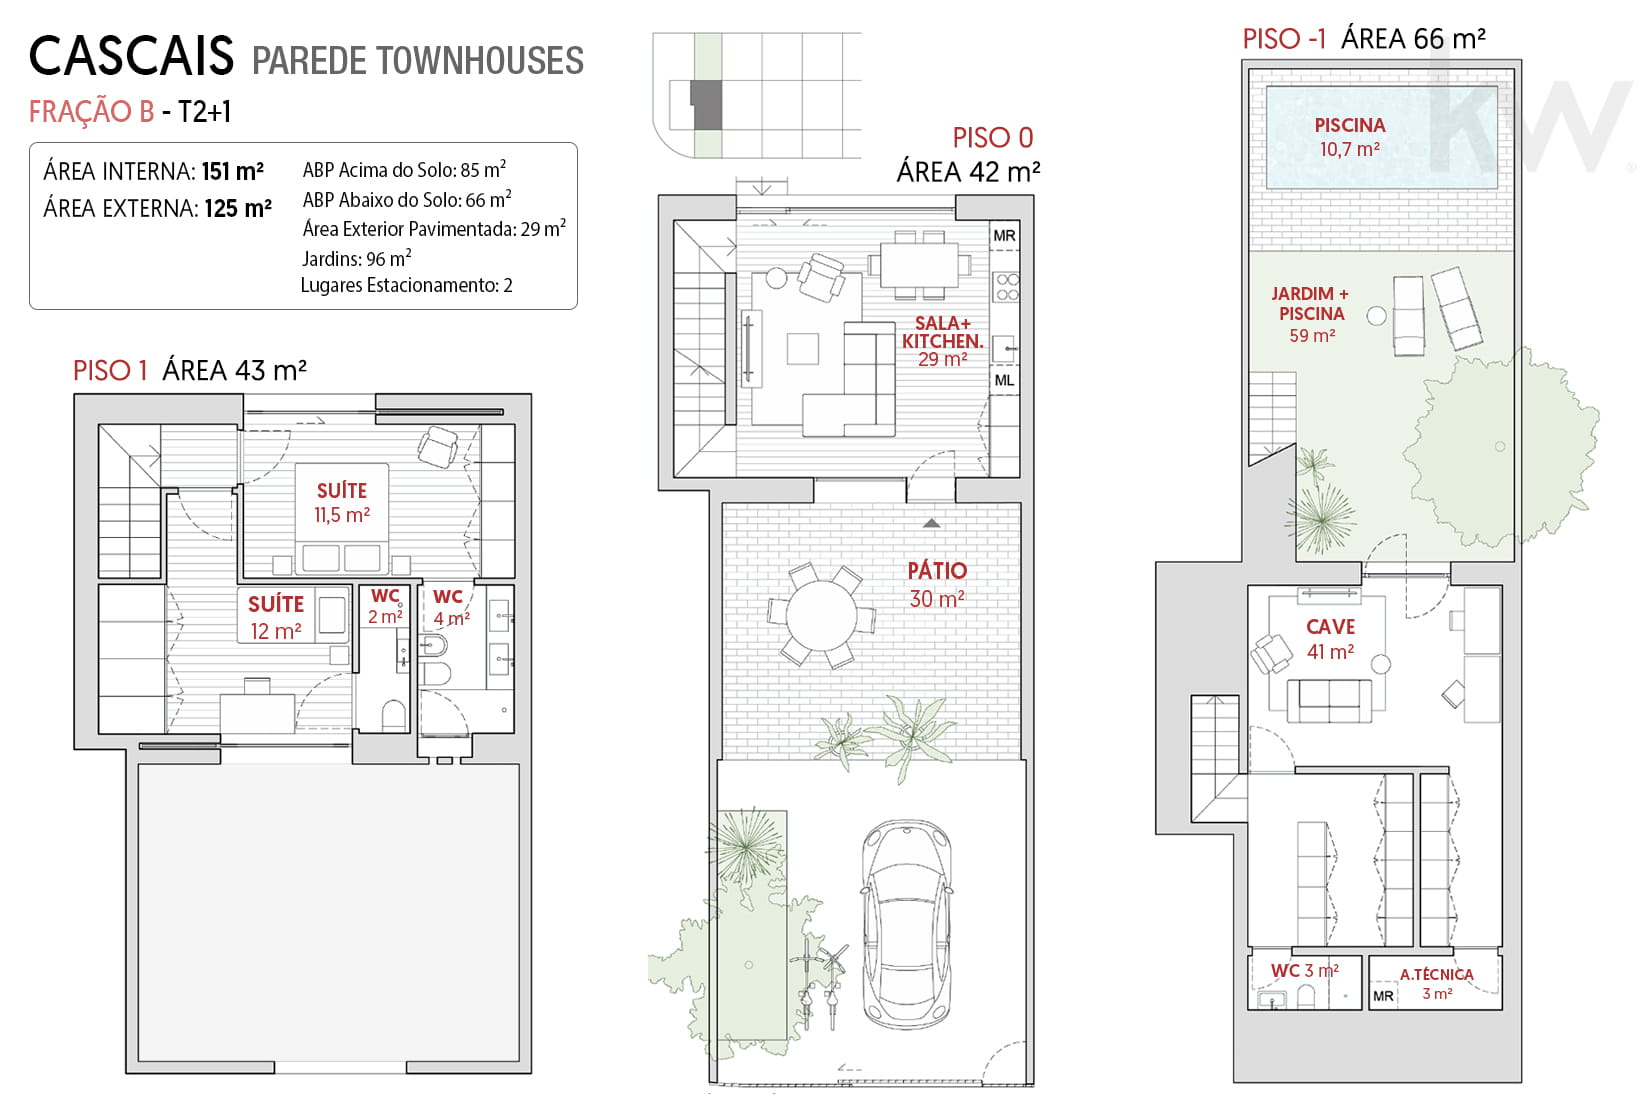 Plans of Townhouse B